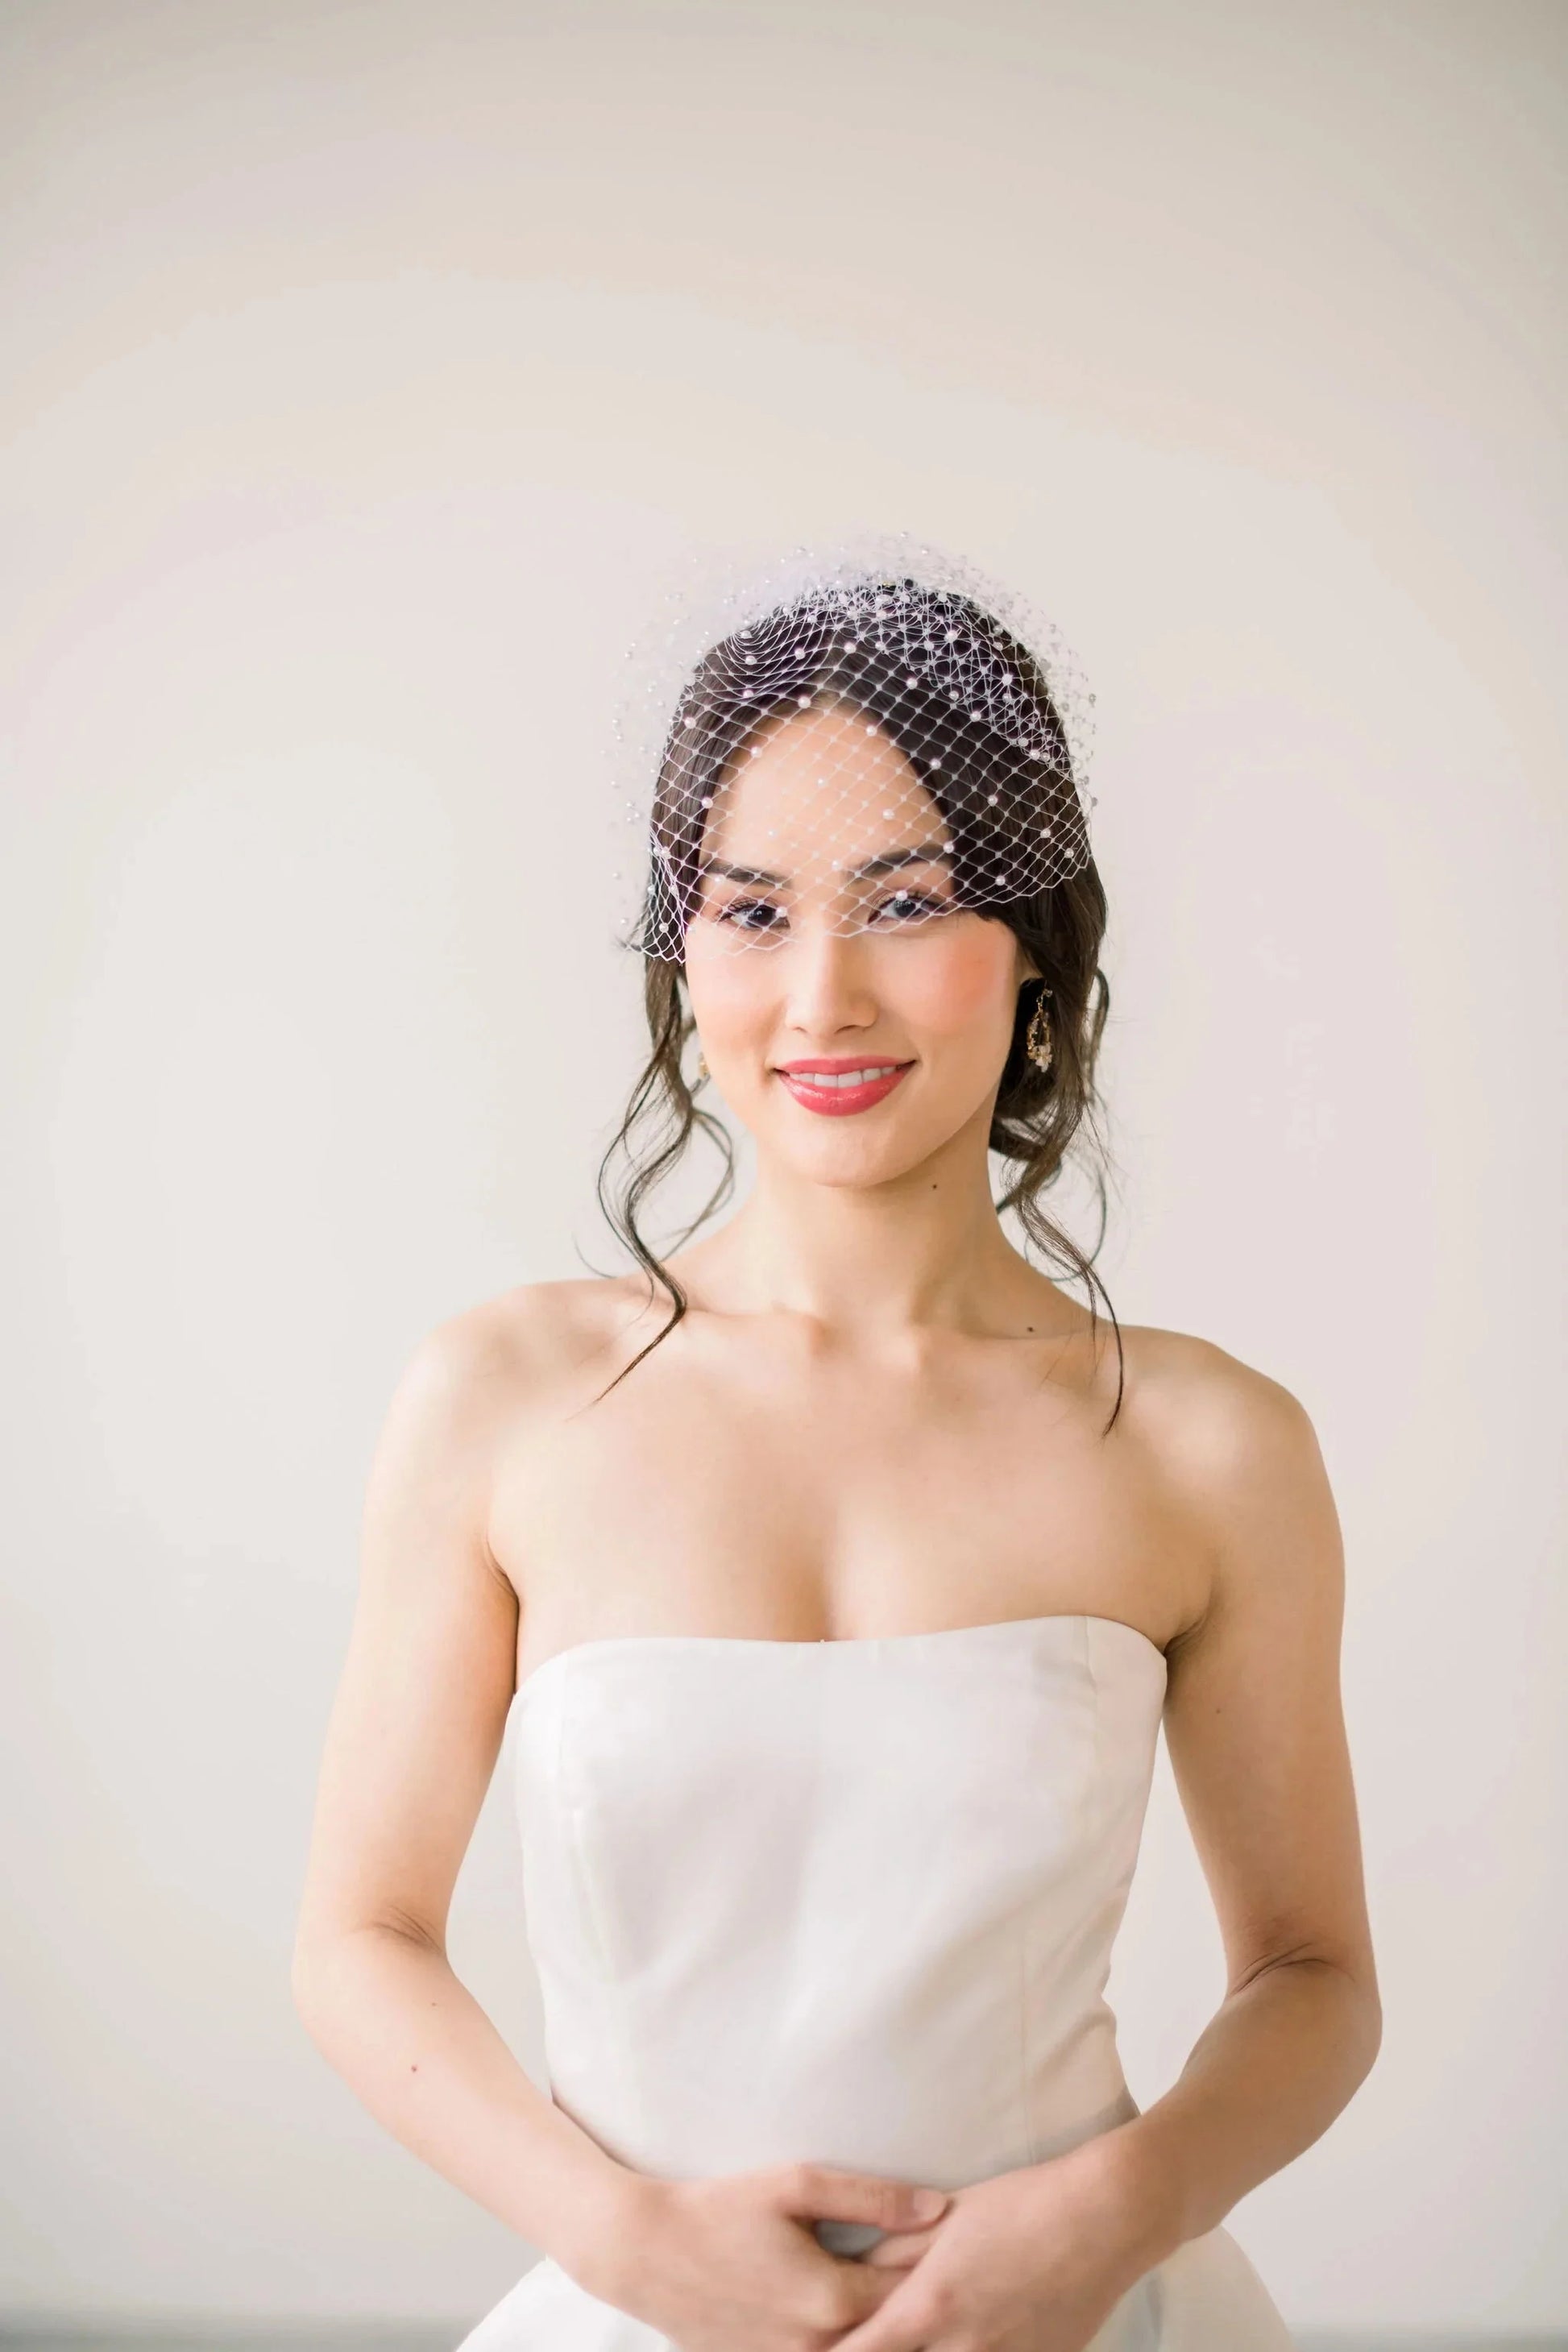 Stylish and Sophisticated Birdcage Veils - Chic Vintage Brides : Chic  Vintage Brides